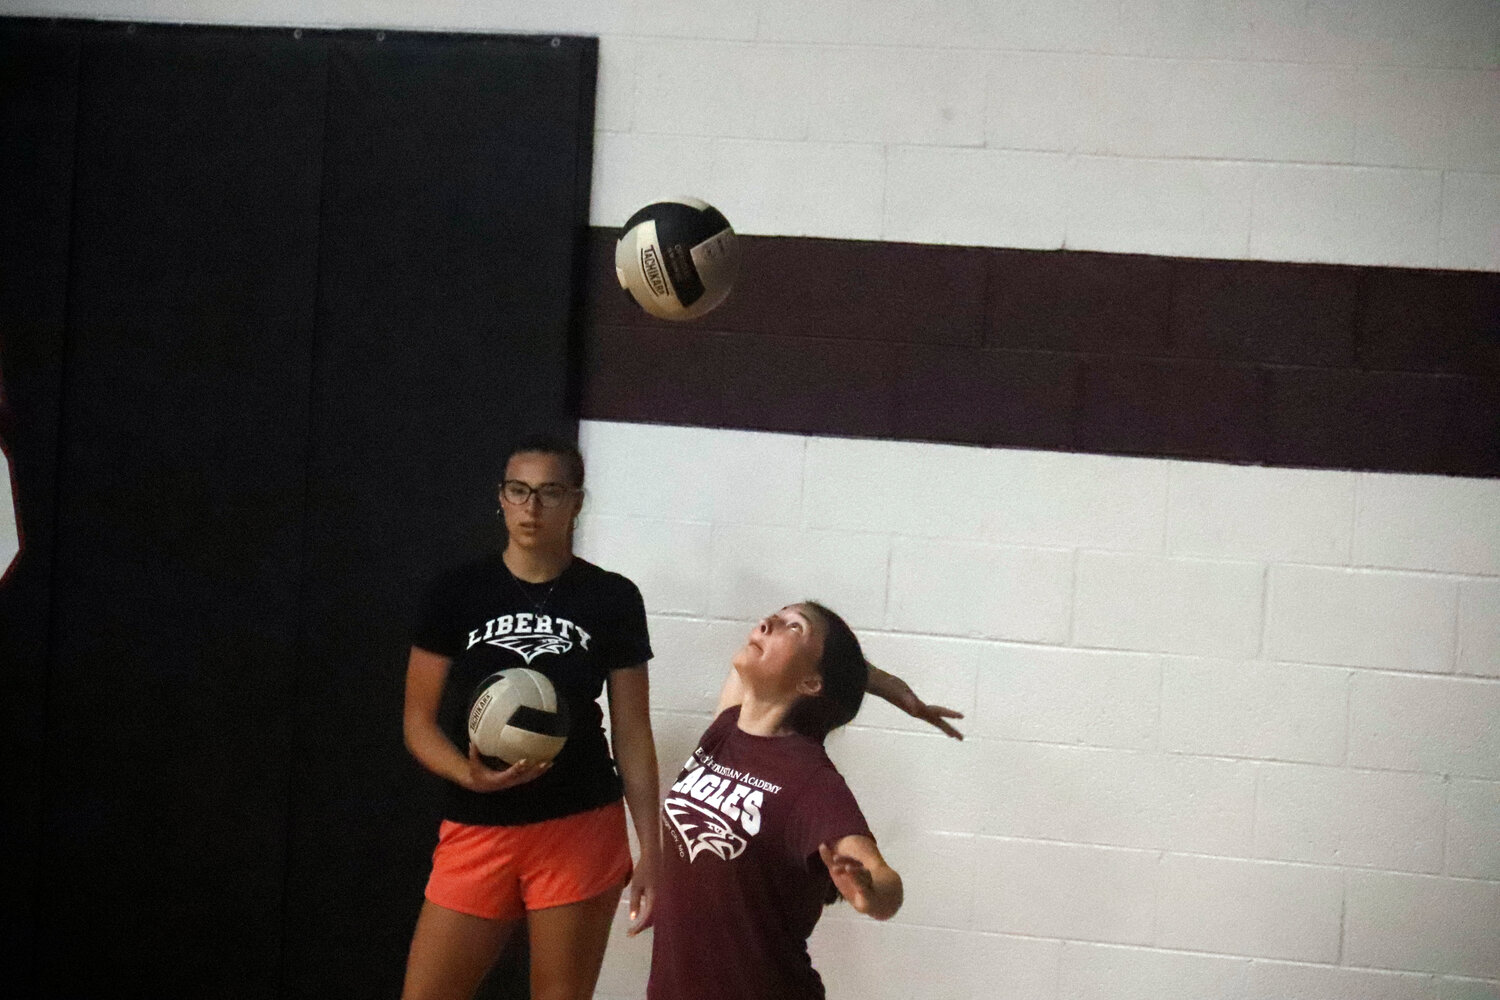 Raelee Bruno (right) practices her serve as assistant coach Gracie Foran looks on.